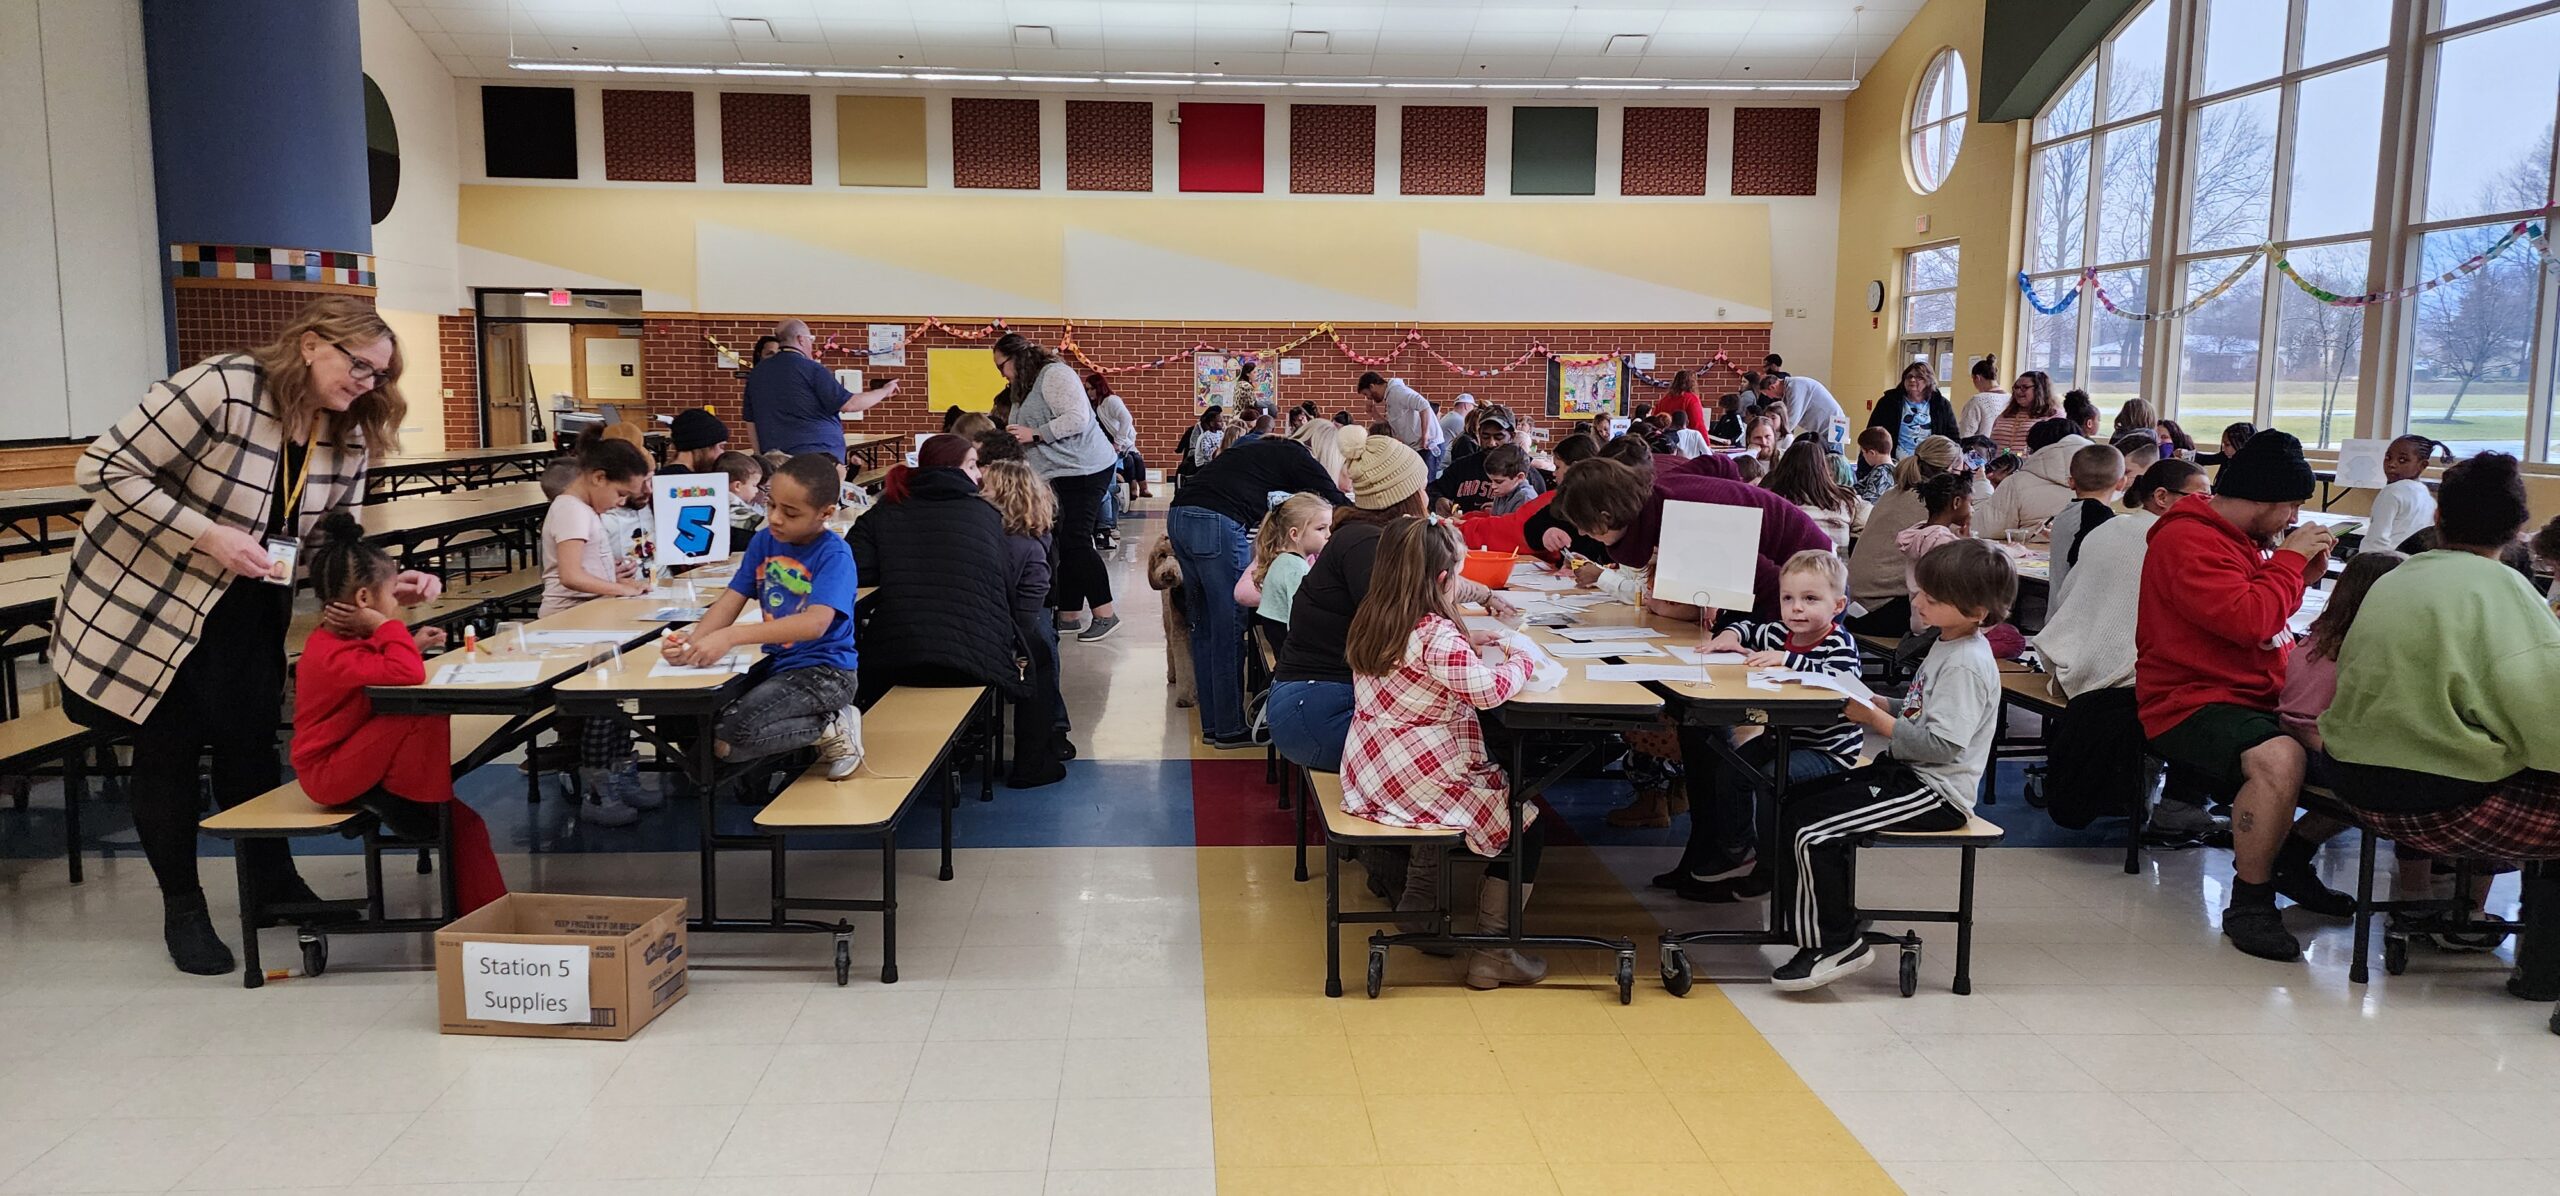 School + Family = Fun, Positive Learning Experience for Lincoln students & parents